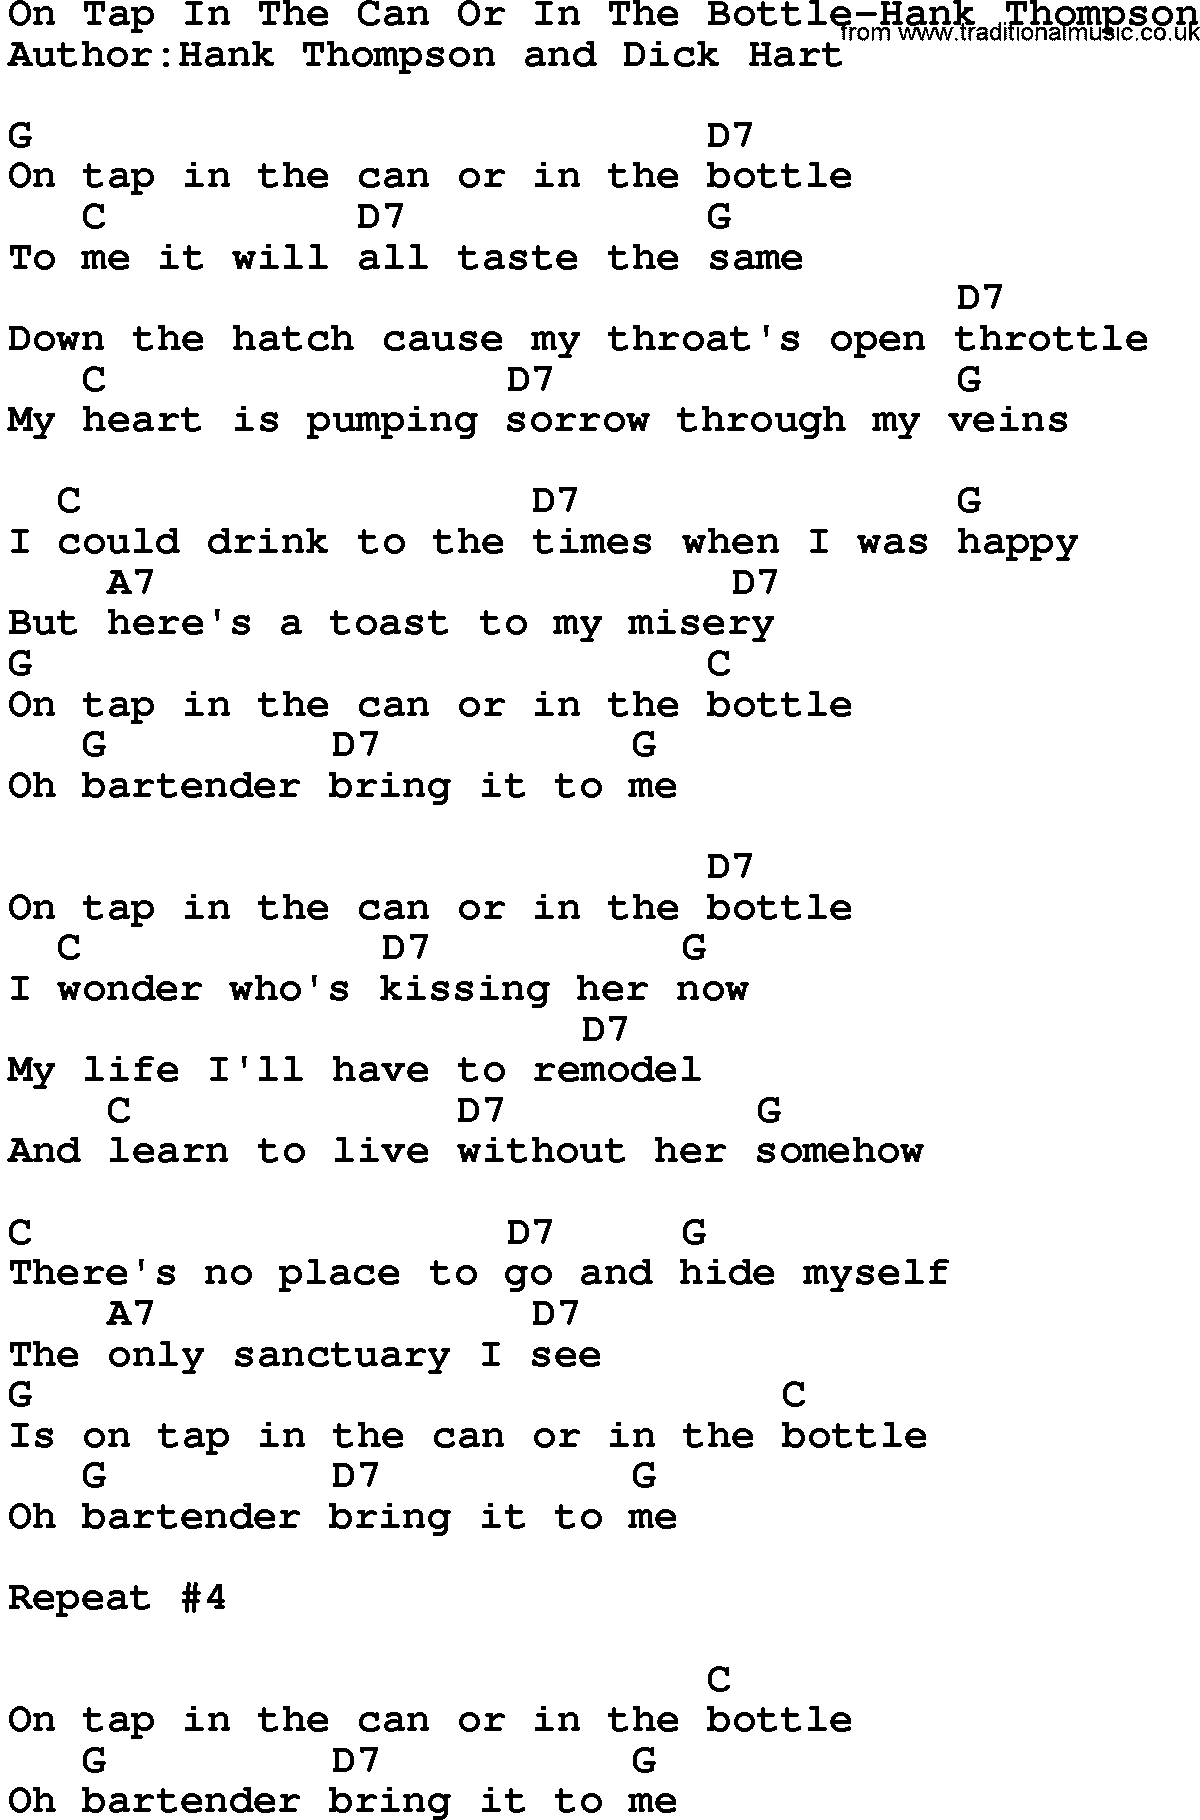 Country music song: On Tap In The Can Or In The Bottle-Hank Thompson lyrics and chords